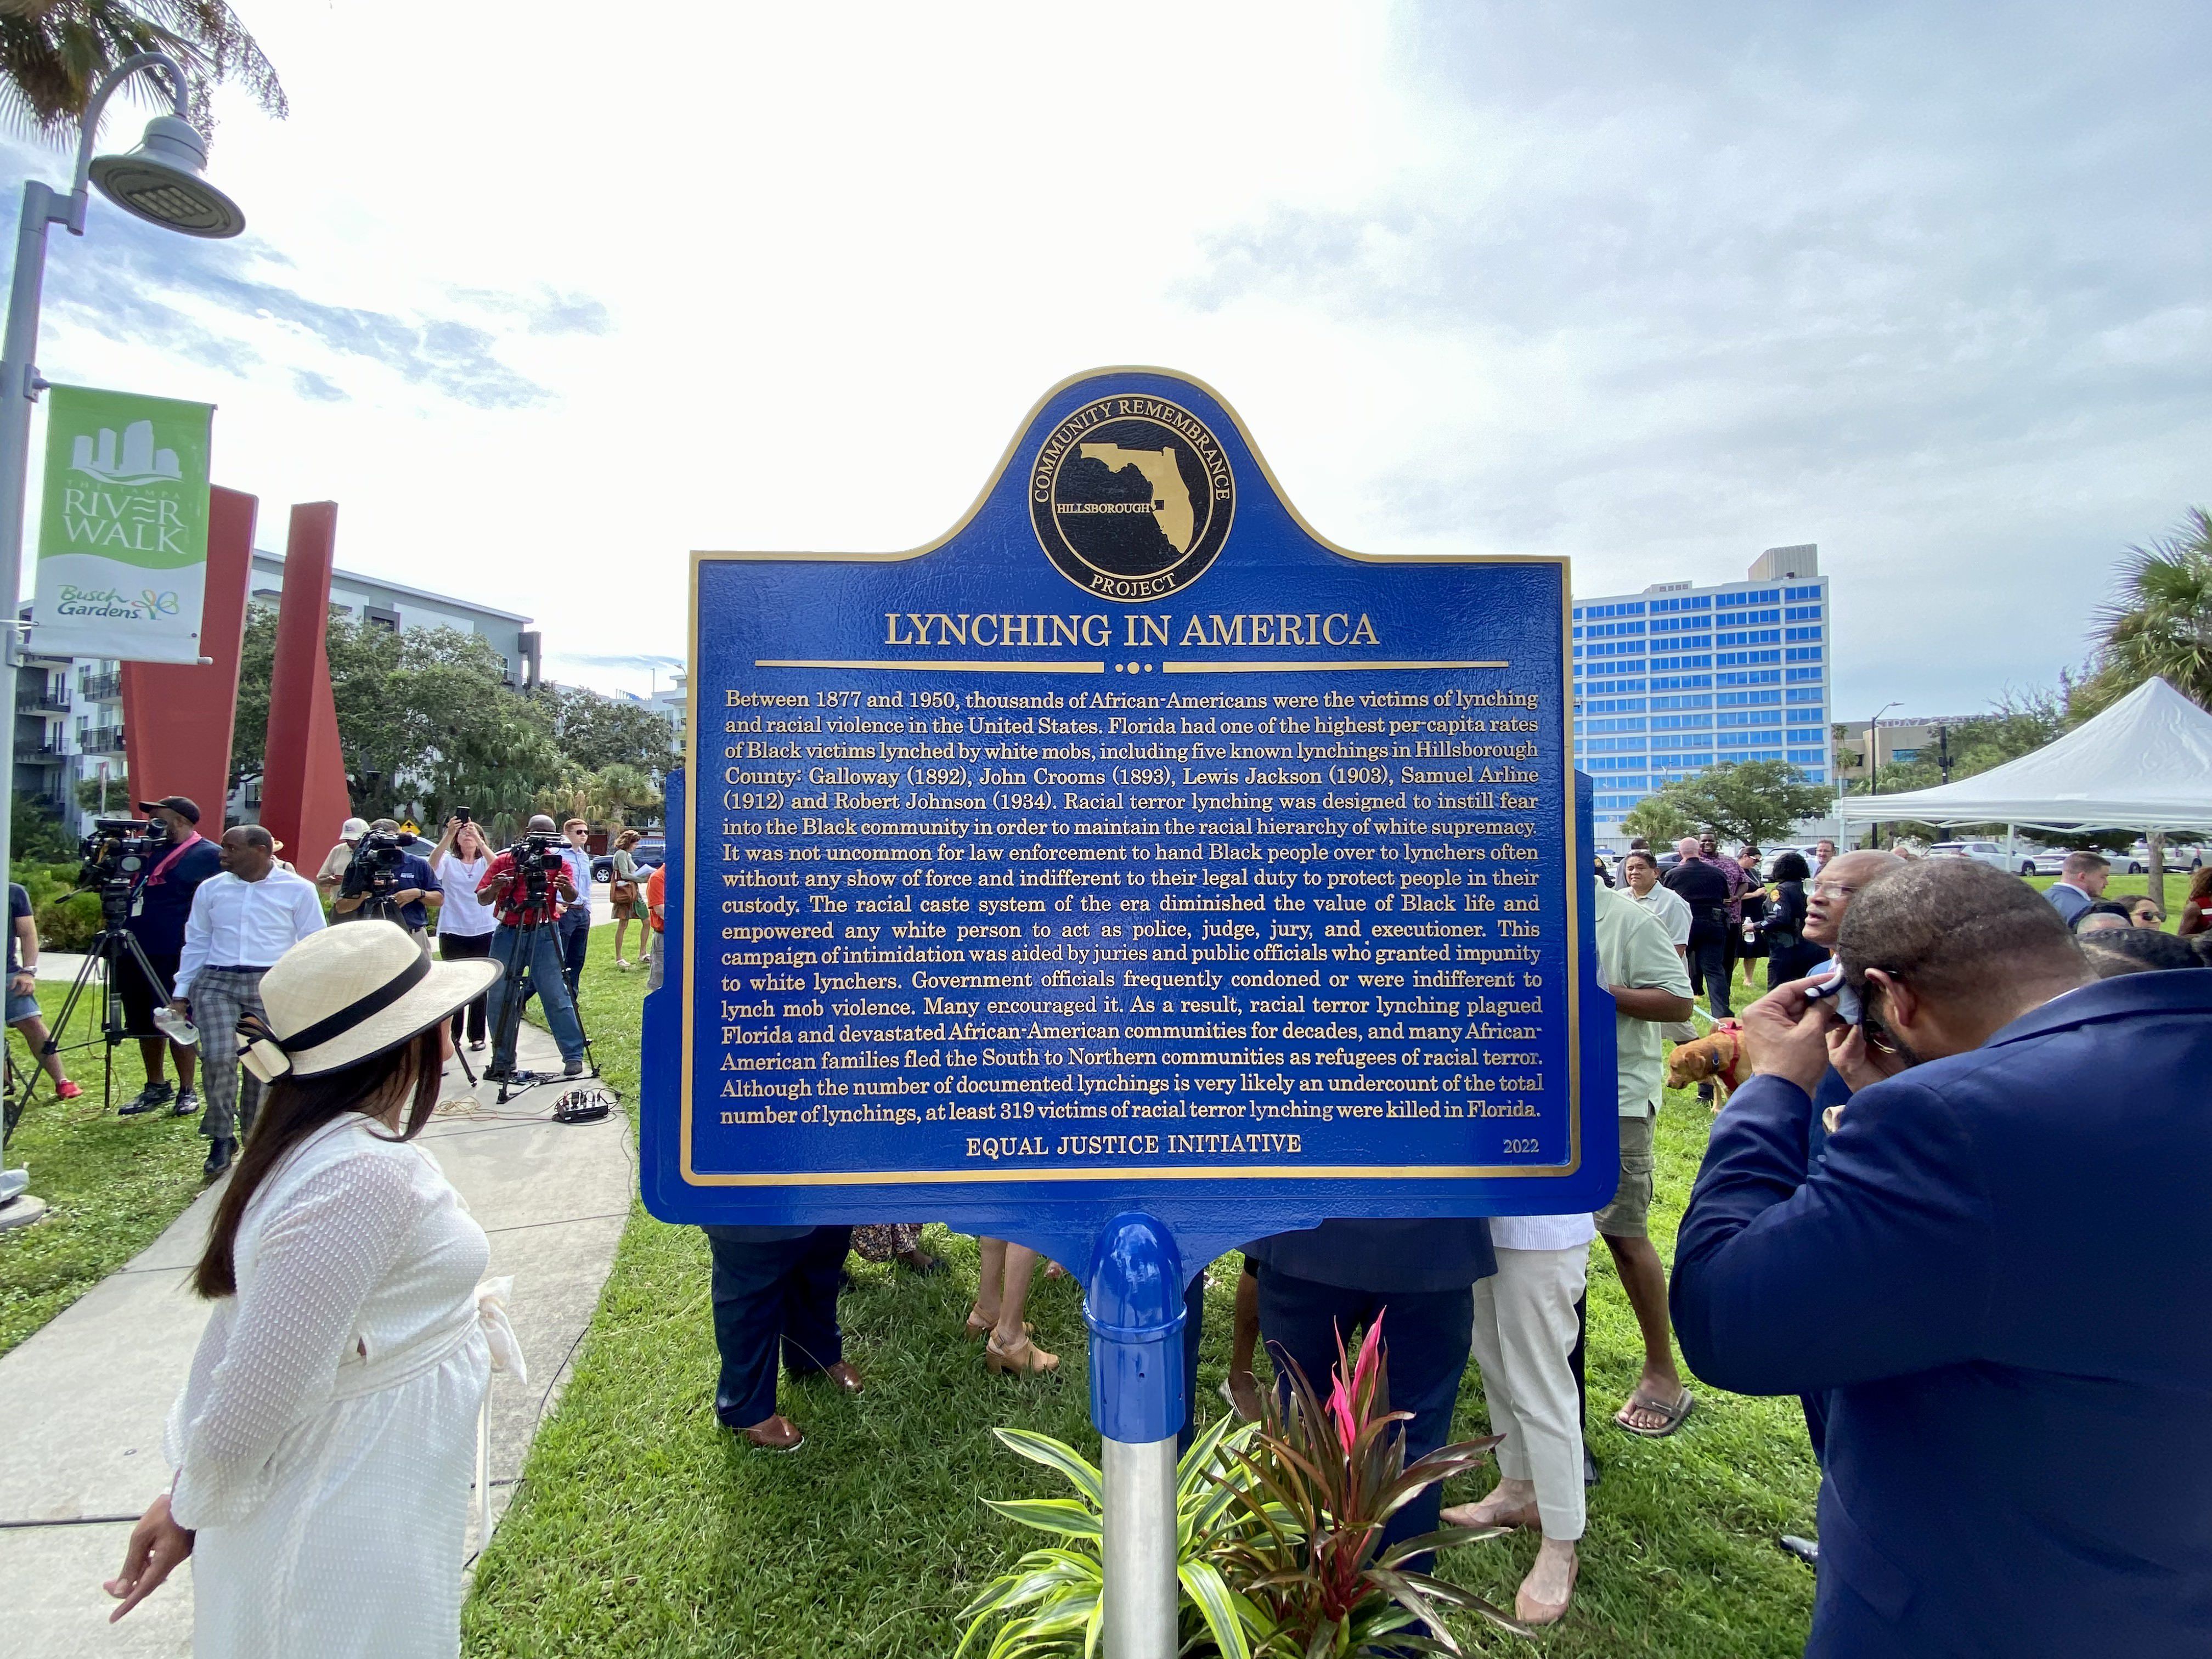 A historical marker that says "Lynching in America."